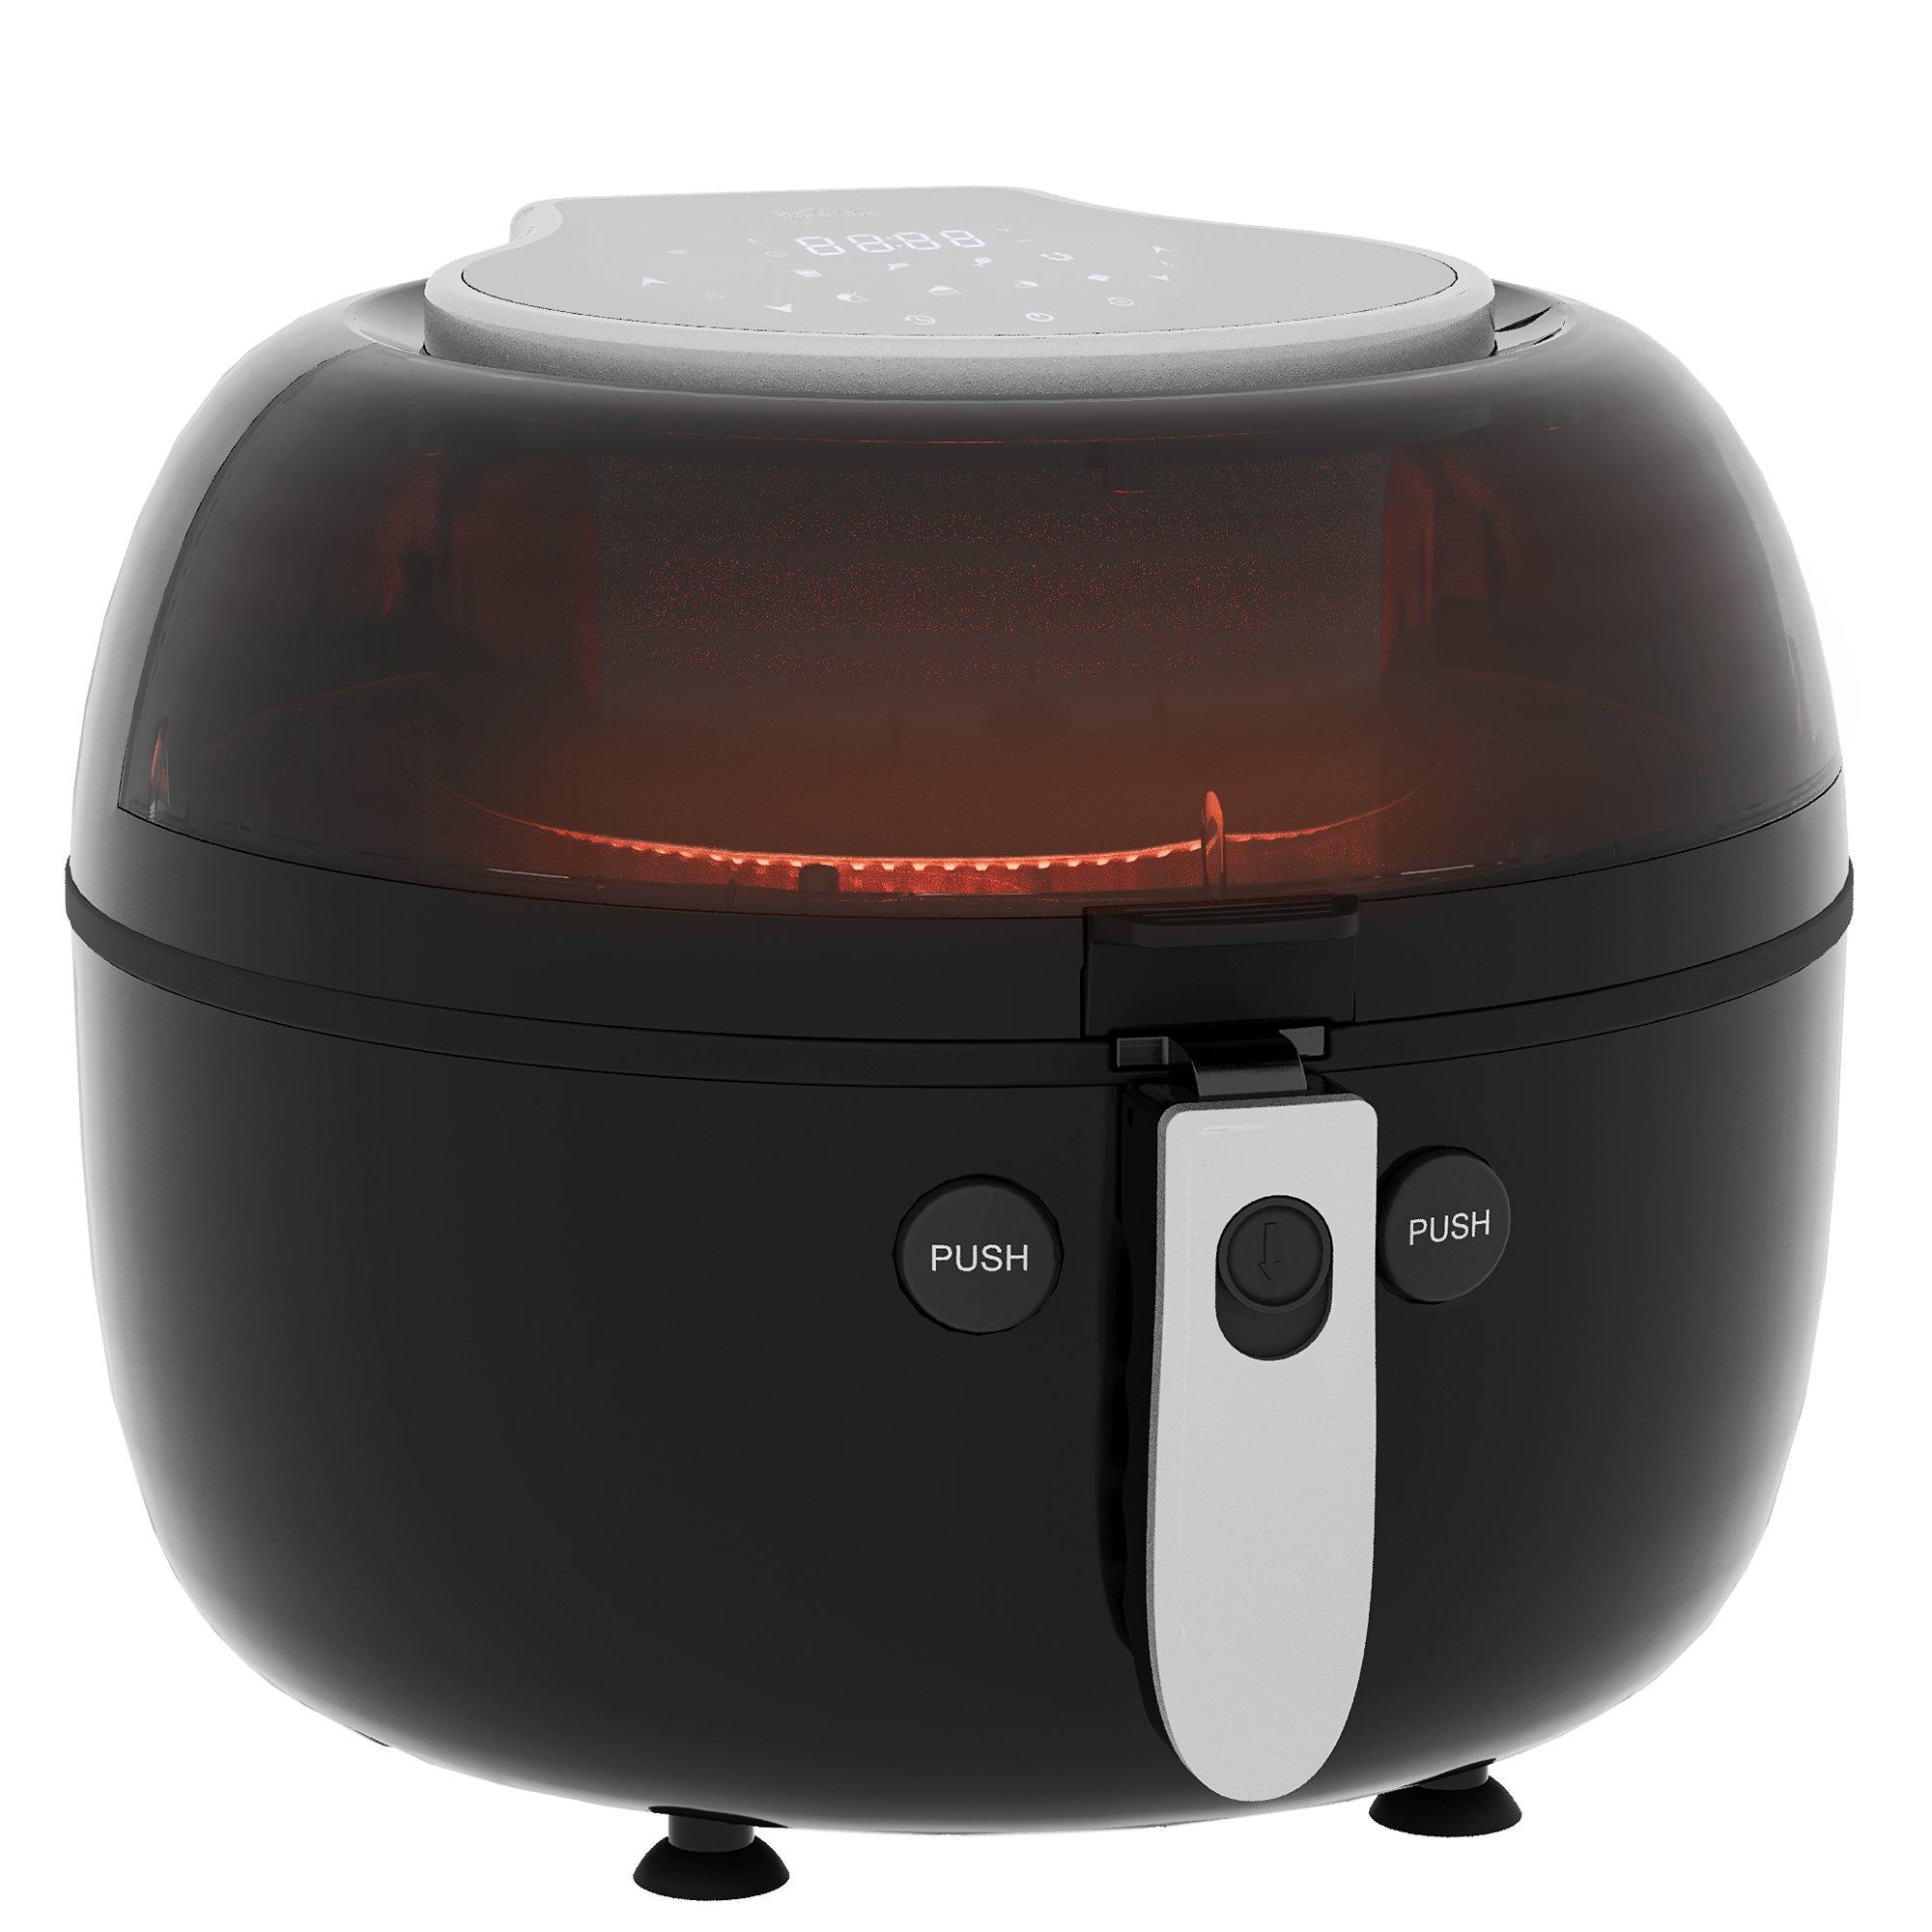 7L Air Fryer Oven Air Fry Roast Broil Bake Dehydrate 7 Presets Timer